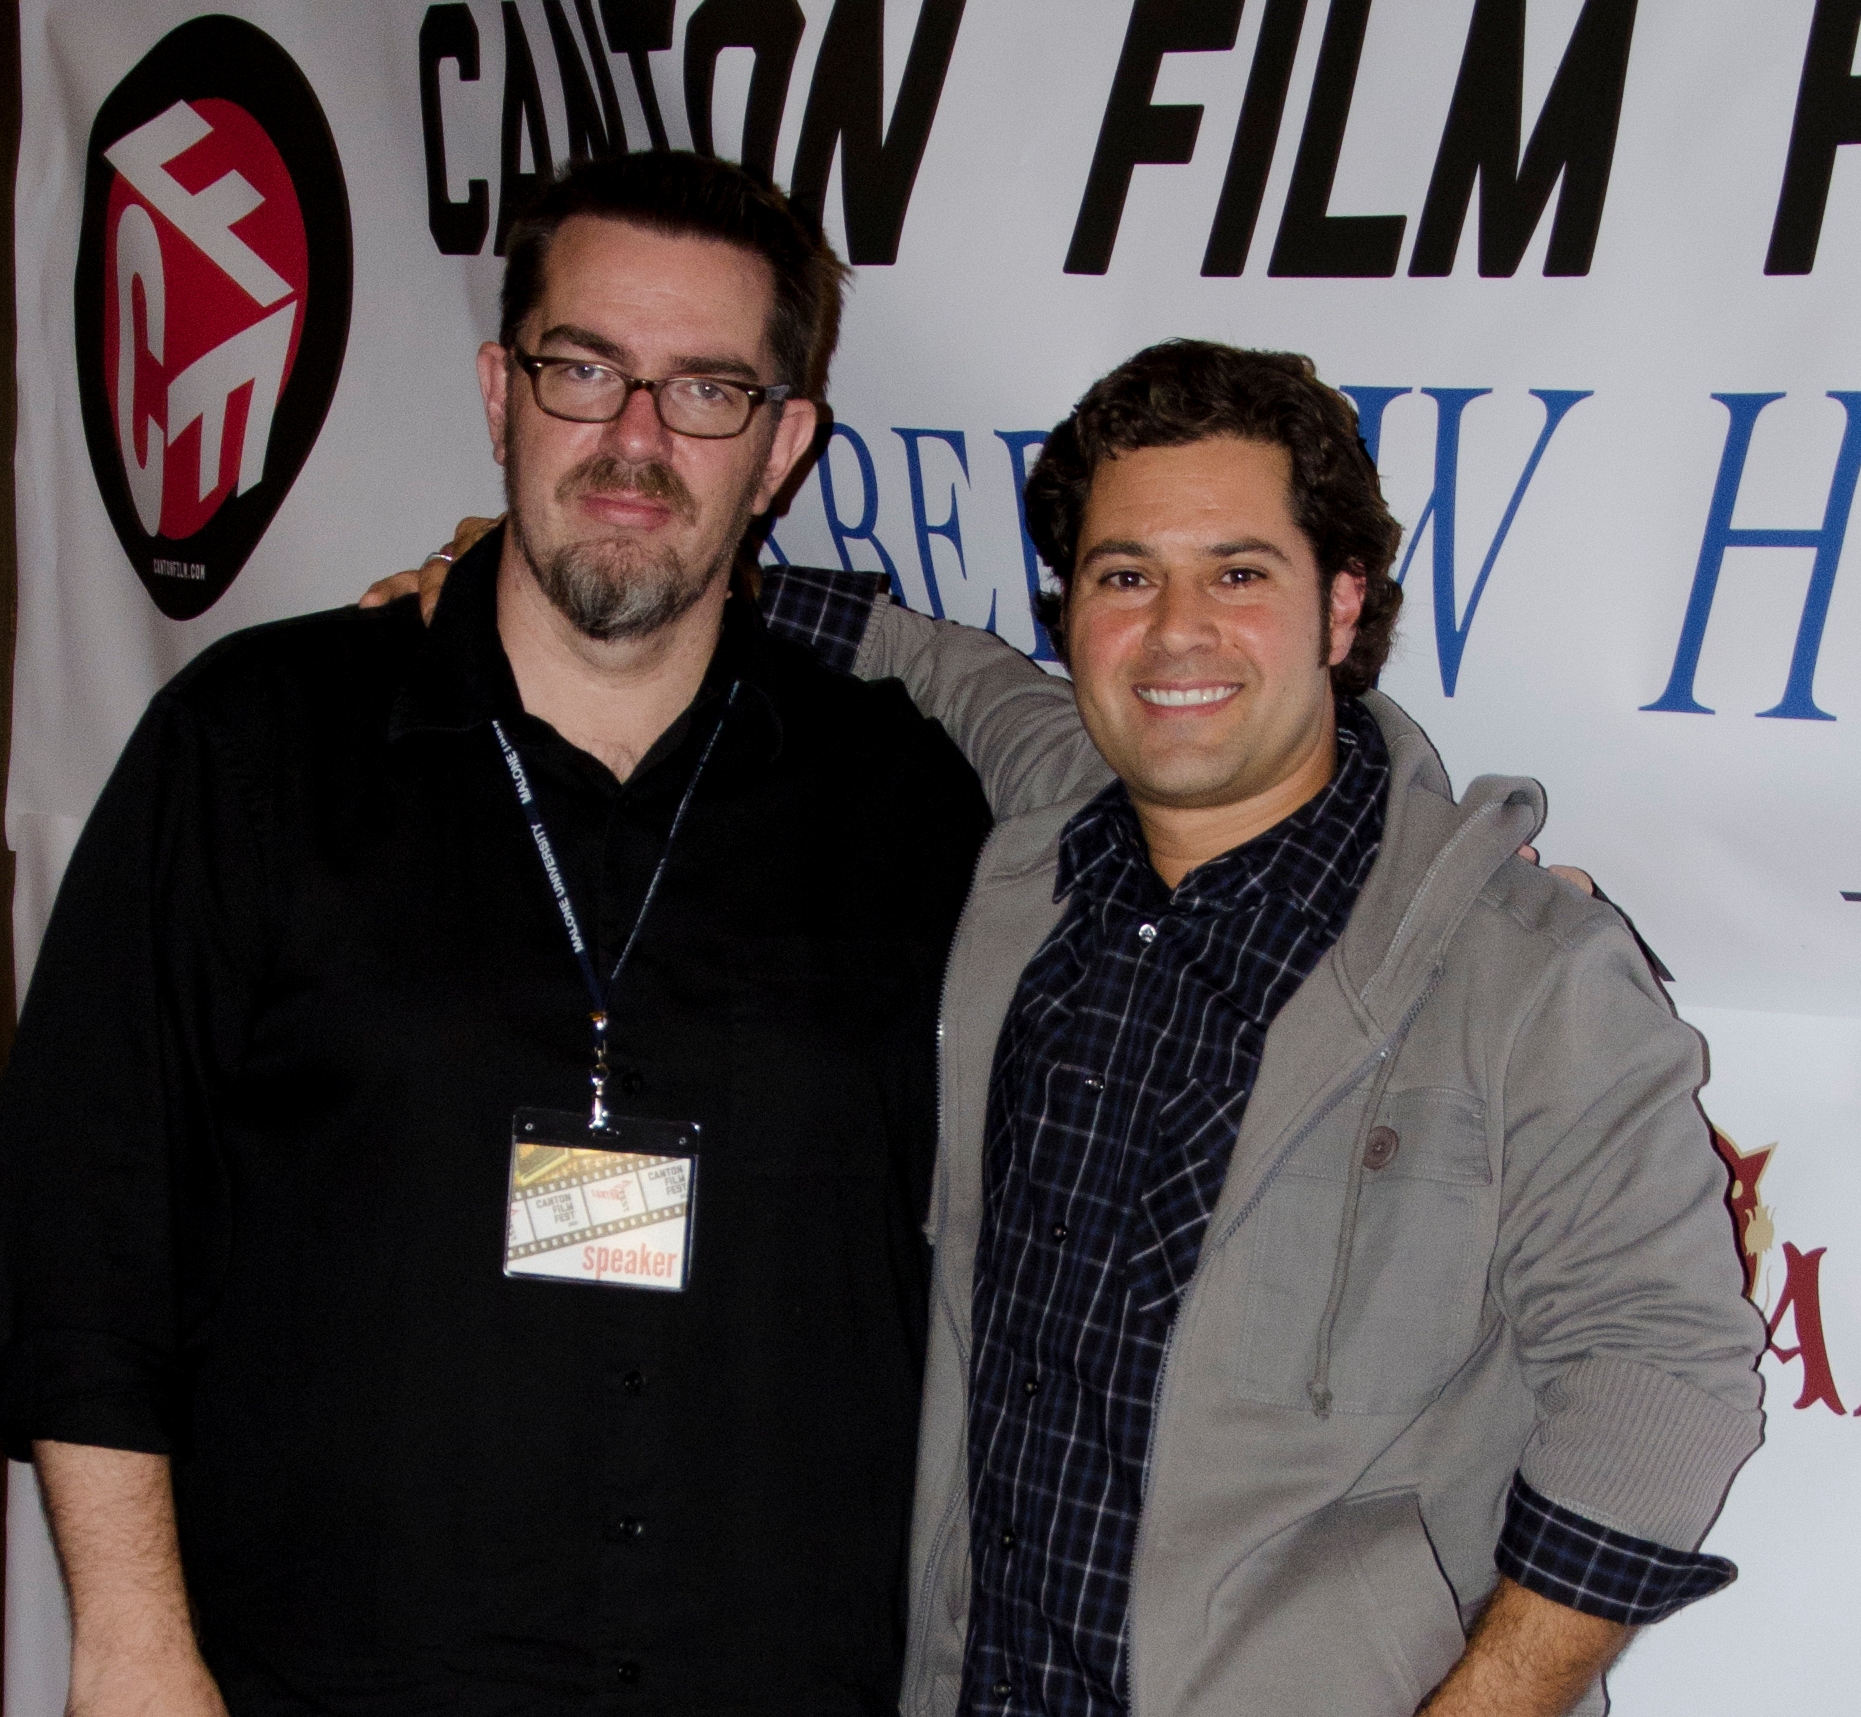 Fellow Ohioians - Writer. Director Drew Daywalt (Stark Raving Mad; MTV's Death Valley) on the red caret at the Canton Film Festival with Fogarty